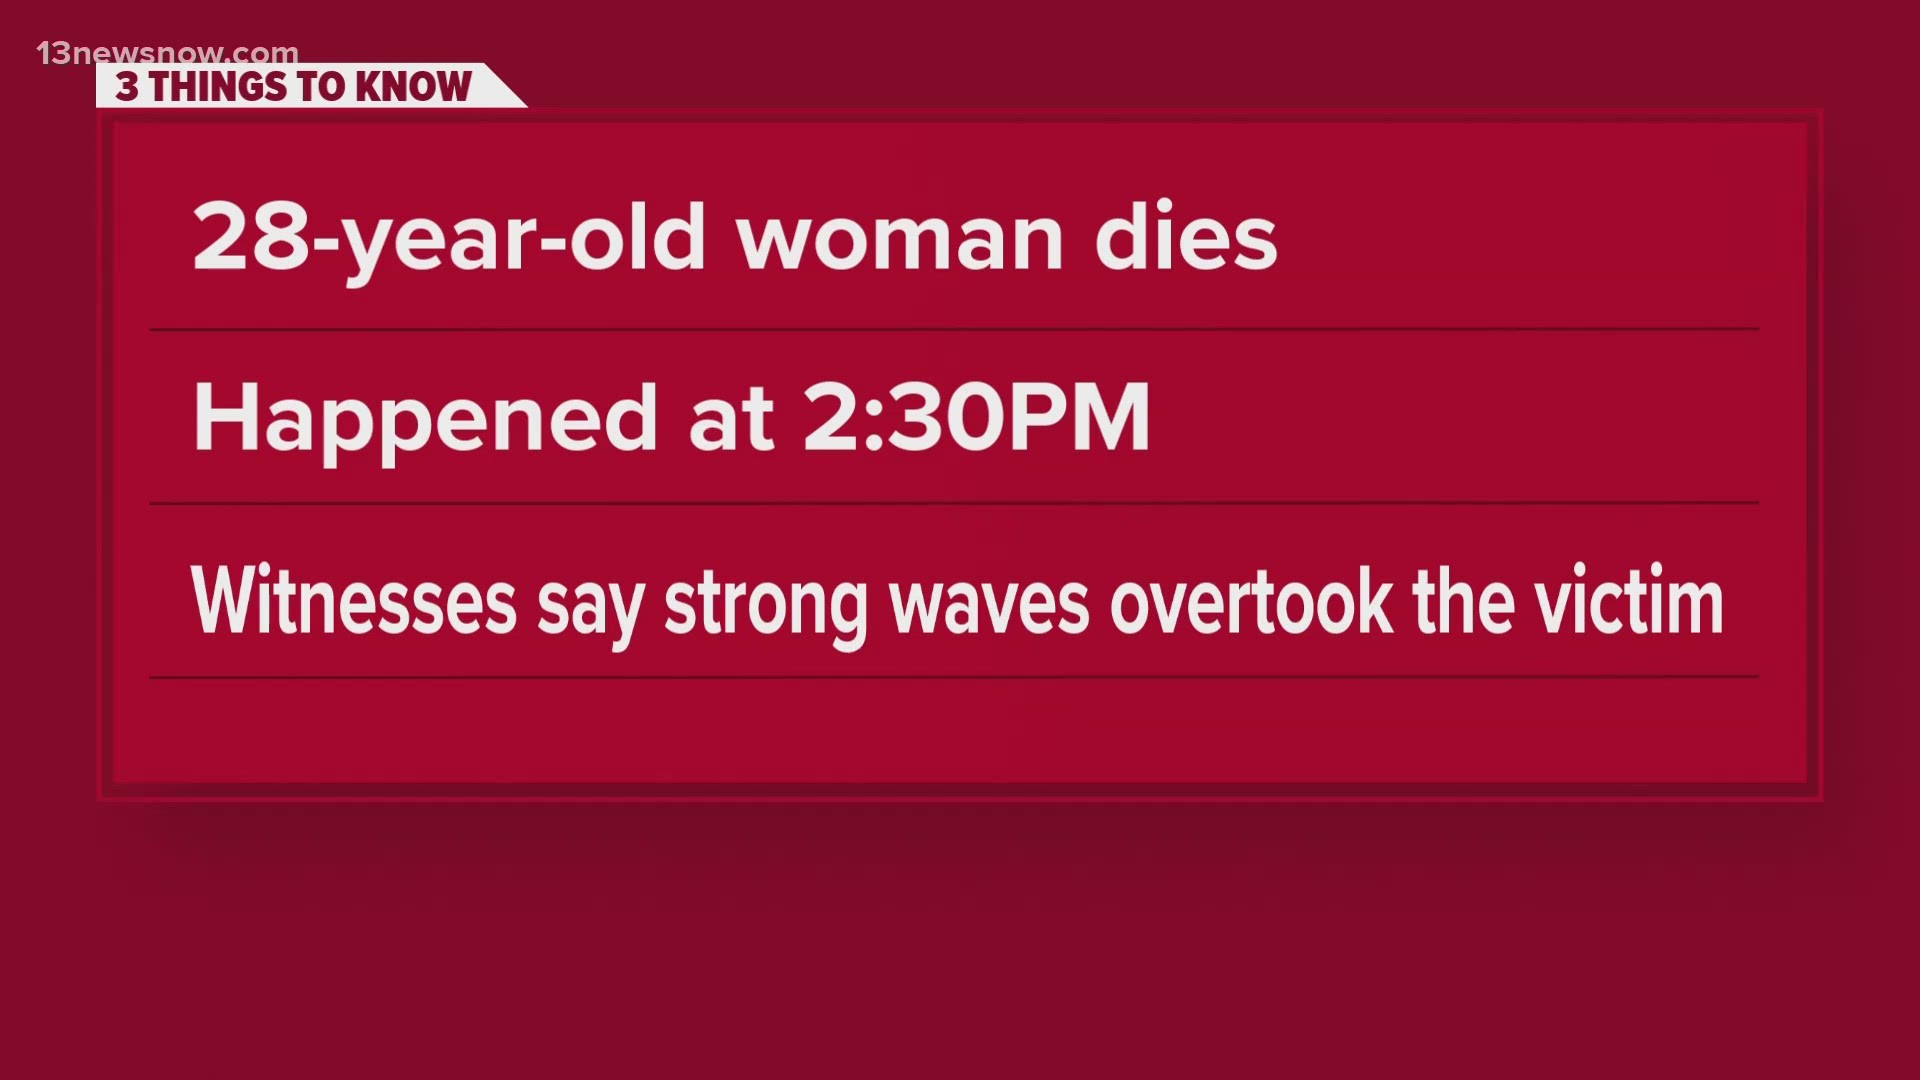 The National Park Service said a witness told them strong waves caused the 28-year-old woman to disappear in the water. She was later found face-down in the ocean.